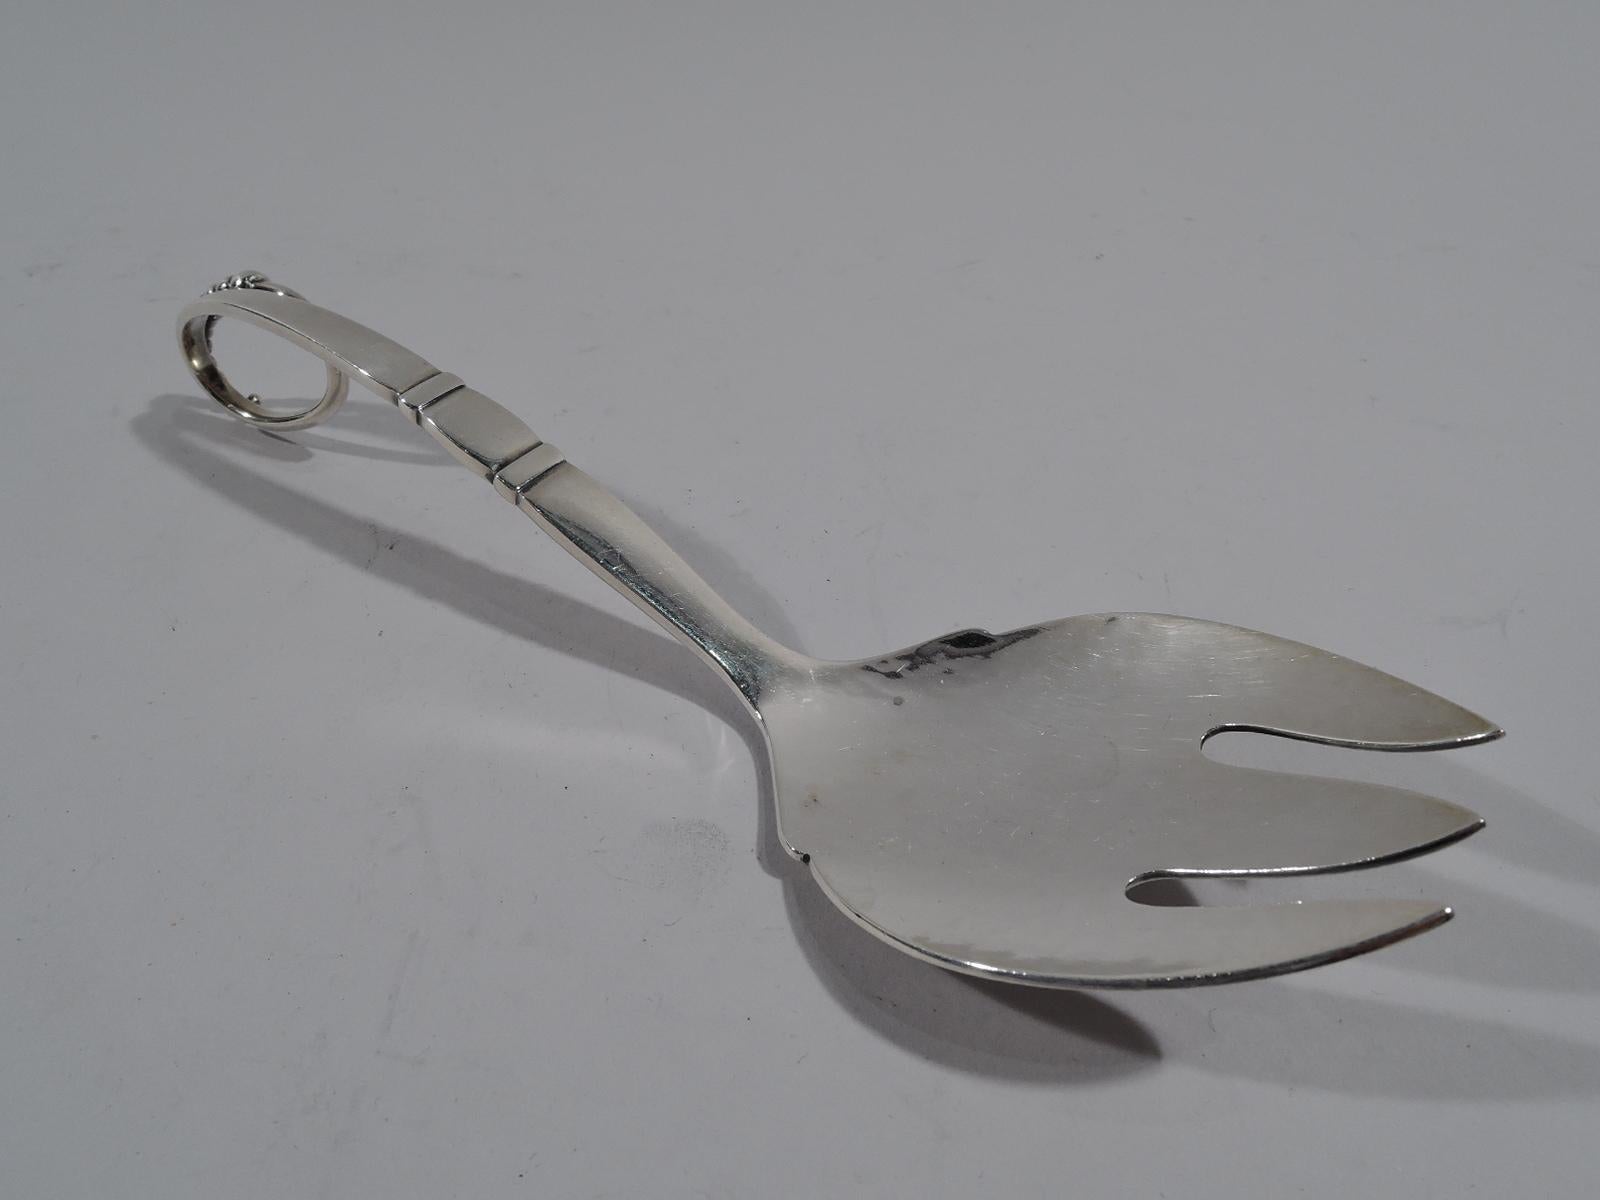 Hand-hammered sterling silver serving fork in pattern no. 41. Made by Georg Jensen in Copenhagen, circa 1930. Curved shank with 3 tines. Tapering handle with 2 bands and loop terminal with graduated beading. Marked “41/ Sterling / Denmark / Georg